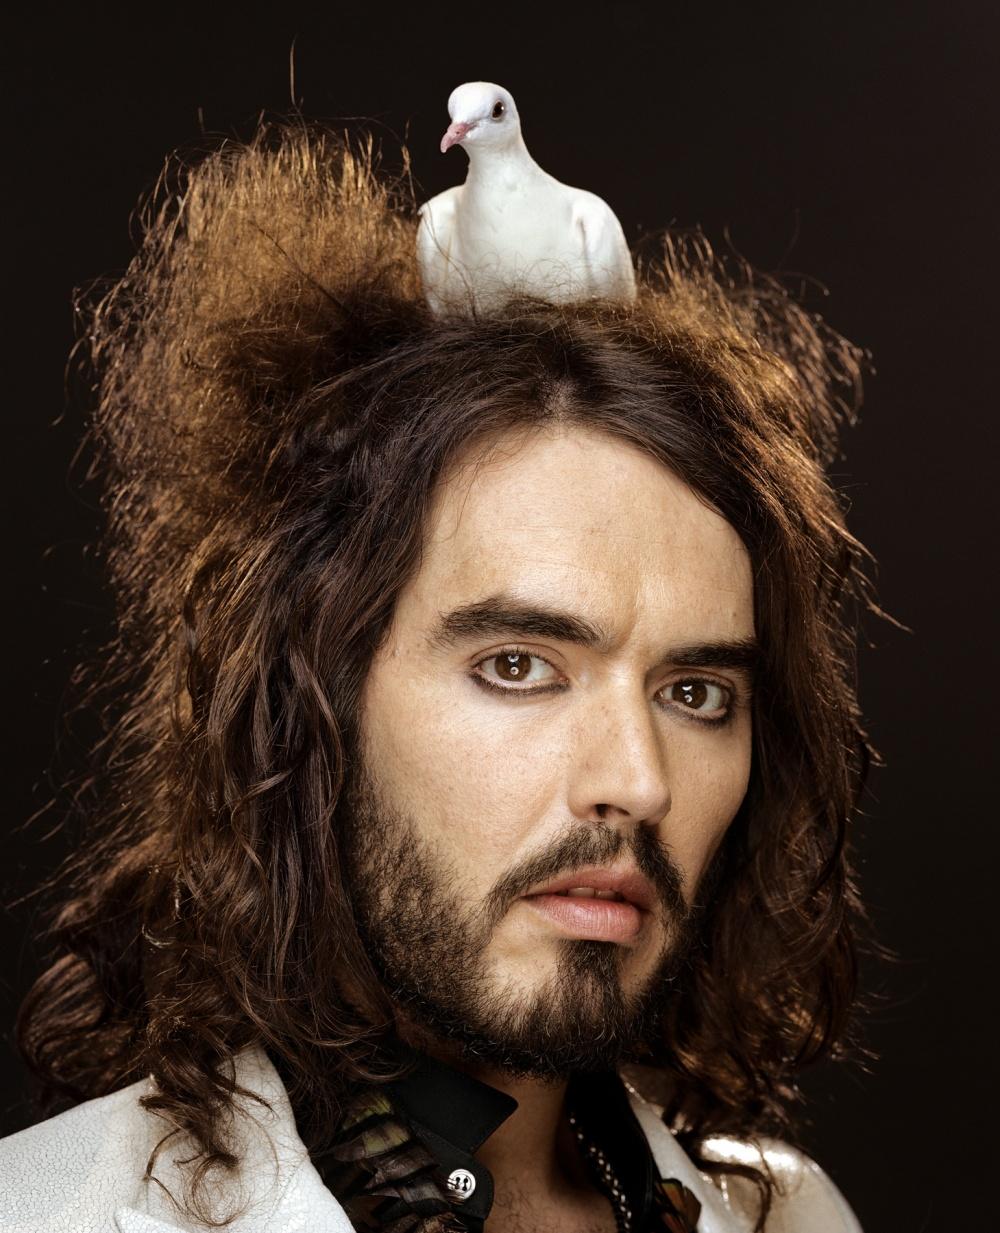 Photo №6431 Russell Brand.